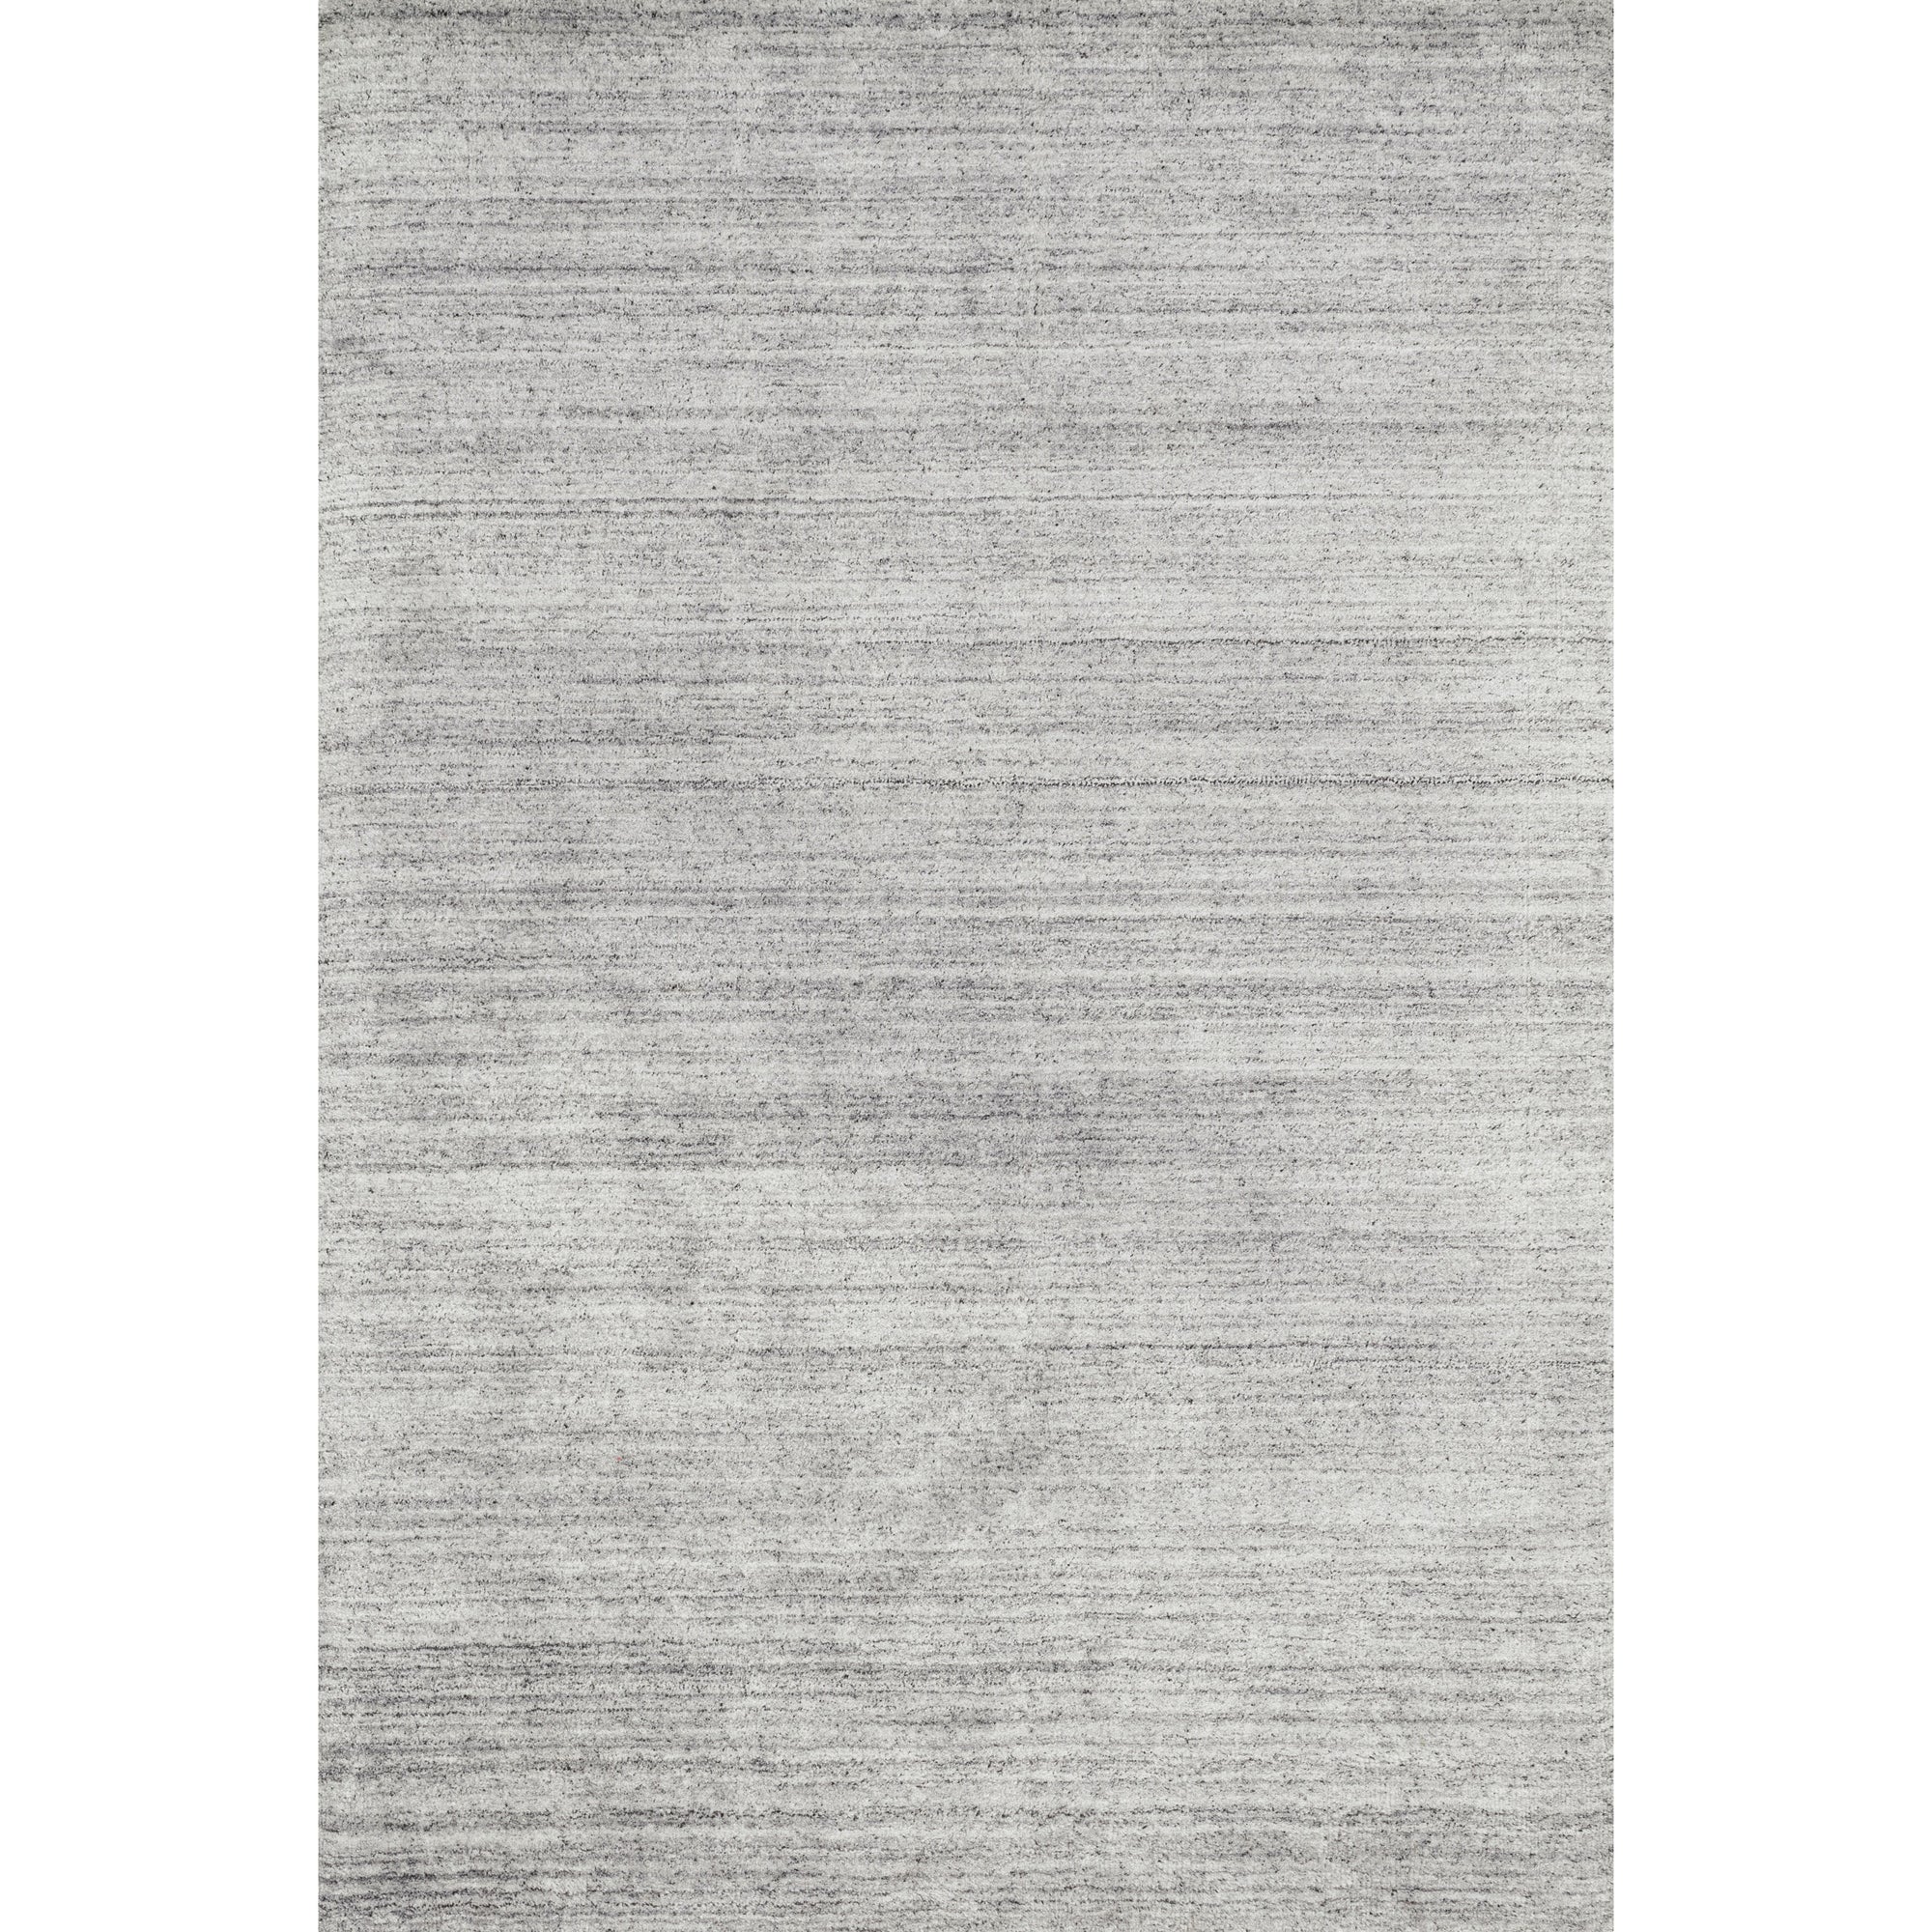 Rugs by Roo Loloi Barkley Silver Area Rug in size 3' 6" x 5' 6"